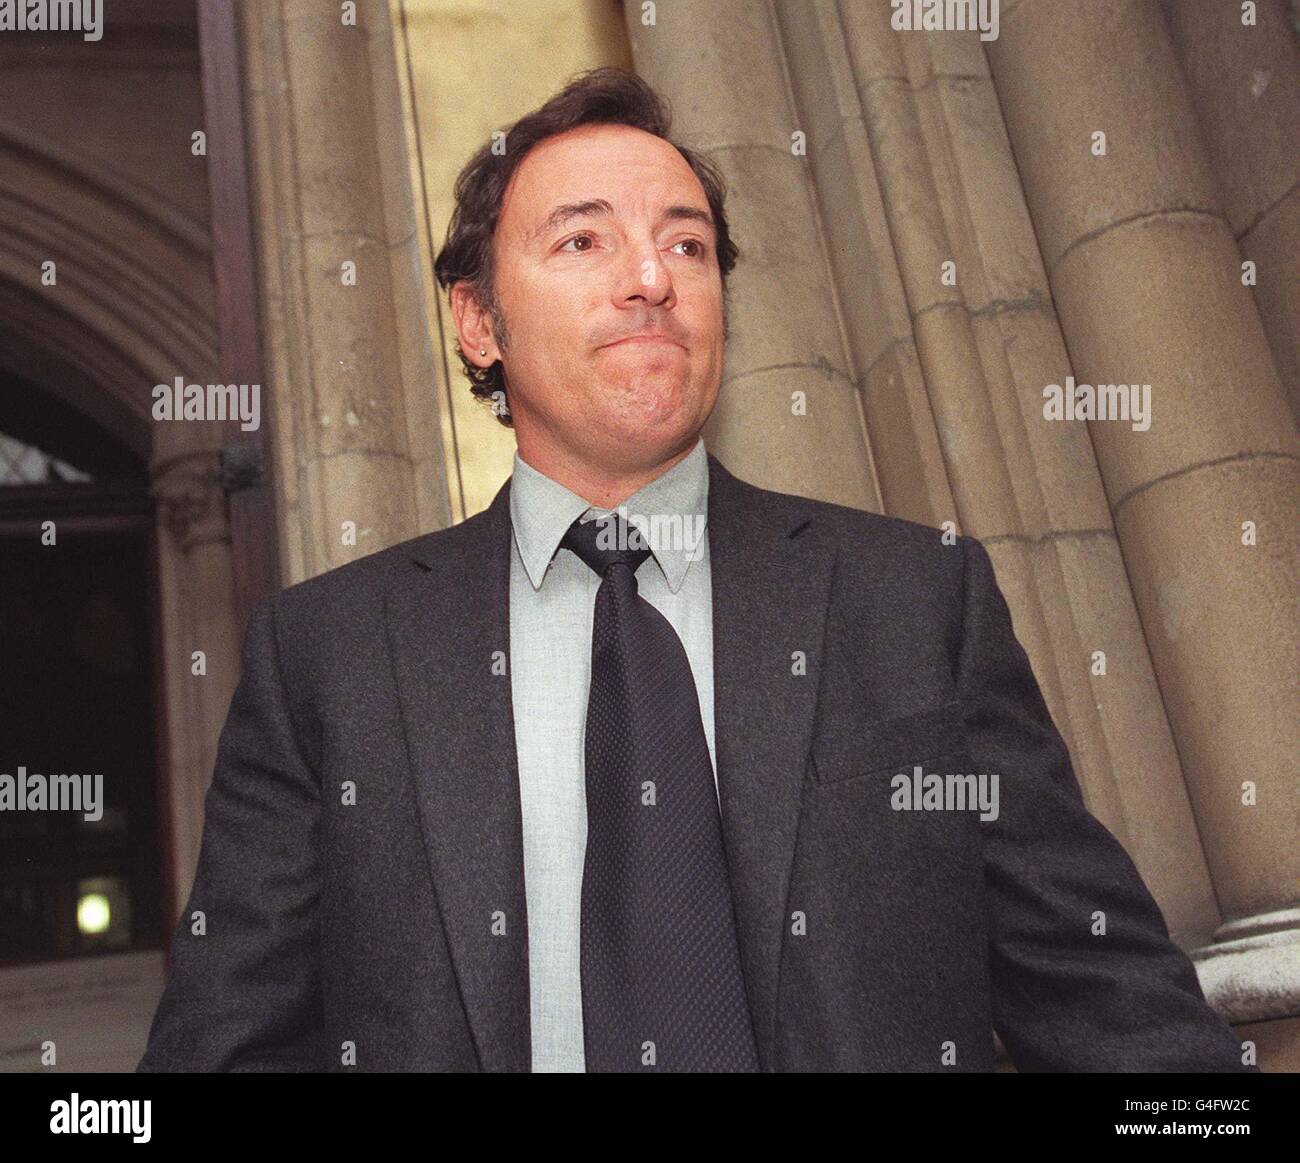 Rock star Bruce Springsteen outside London's High Court today (Wednesday), where he is seeking damages from Middlesex-based Masquerade Music, which is trying to release an album of songs he wrote and recorded 26 years ago. Photo by Ben Curtis/PA See PA story COURTS Springsteen. Stock Photo